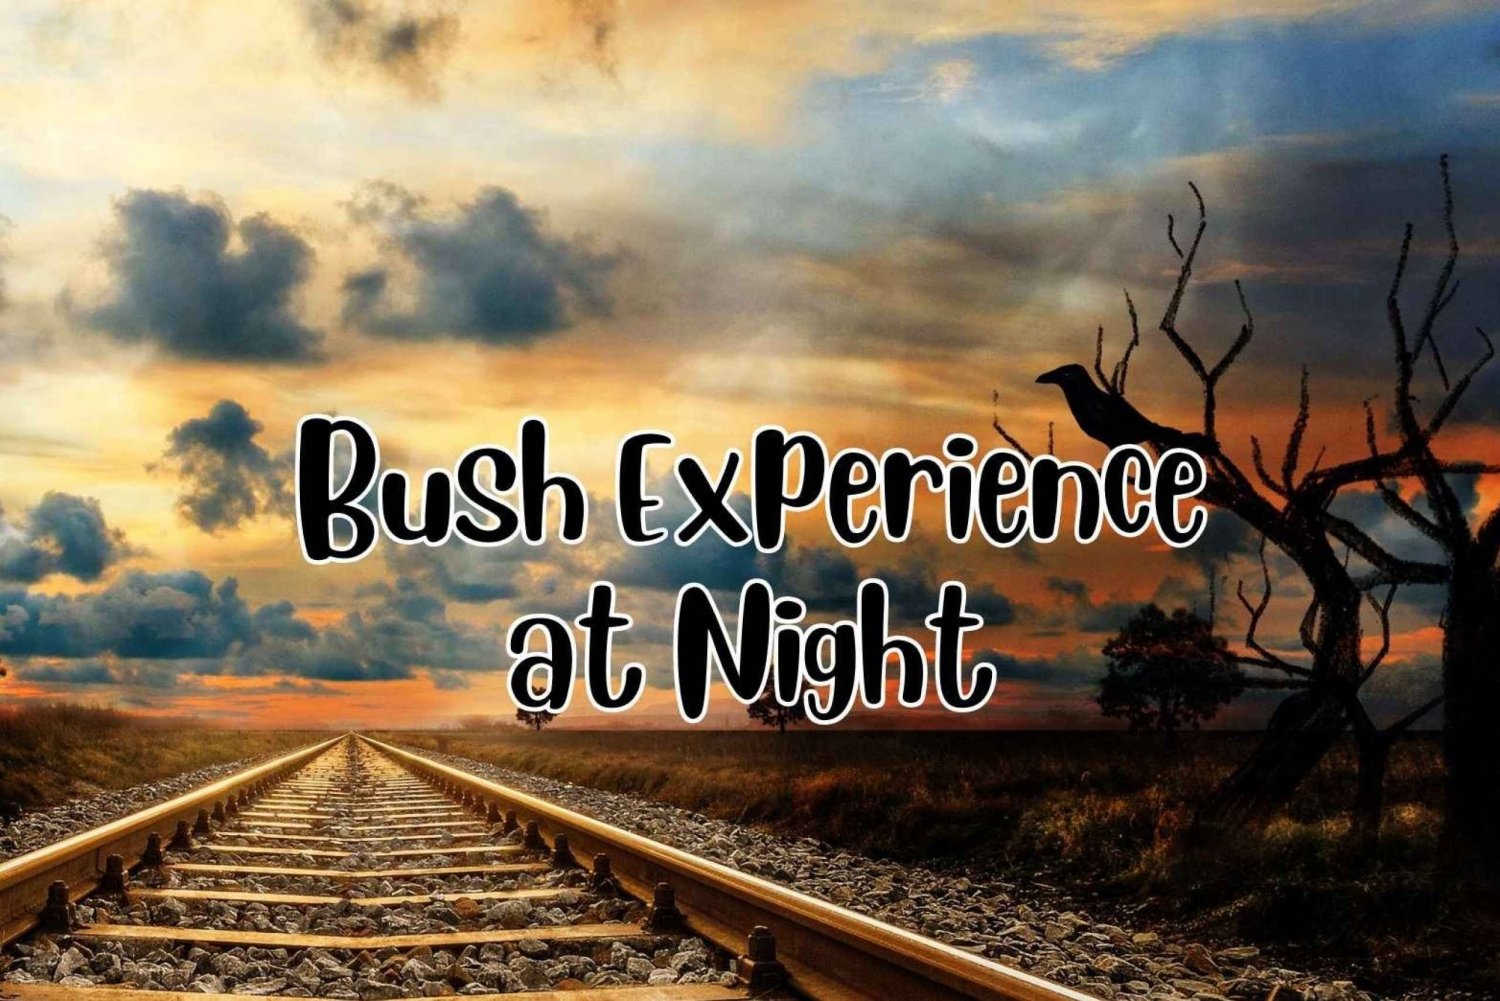 Victoria Falls: Bush Experience at Night with 4x4 Jeep